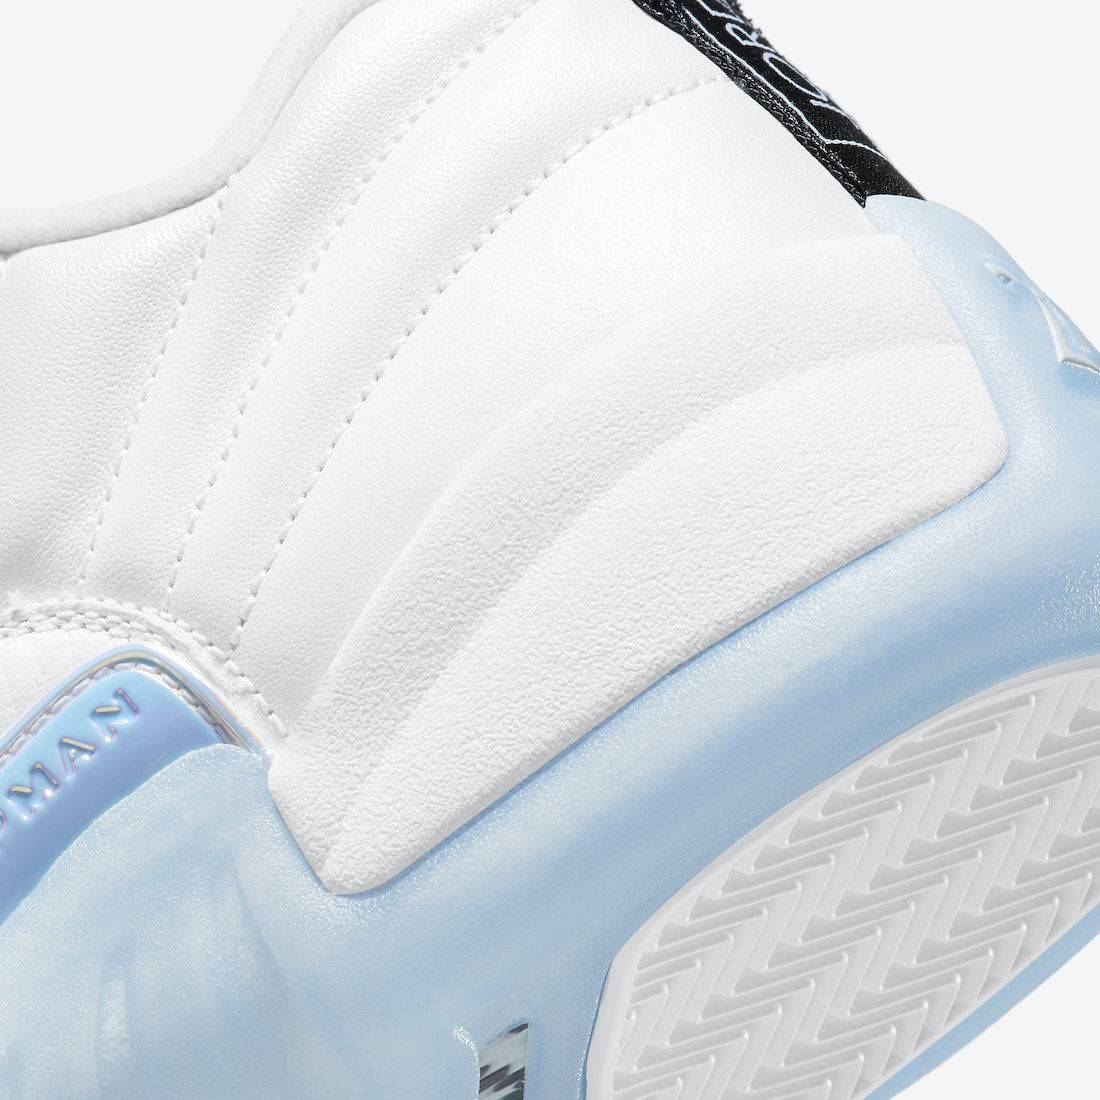 all white 12s release date